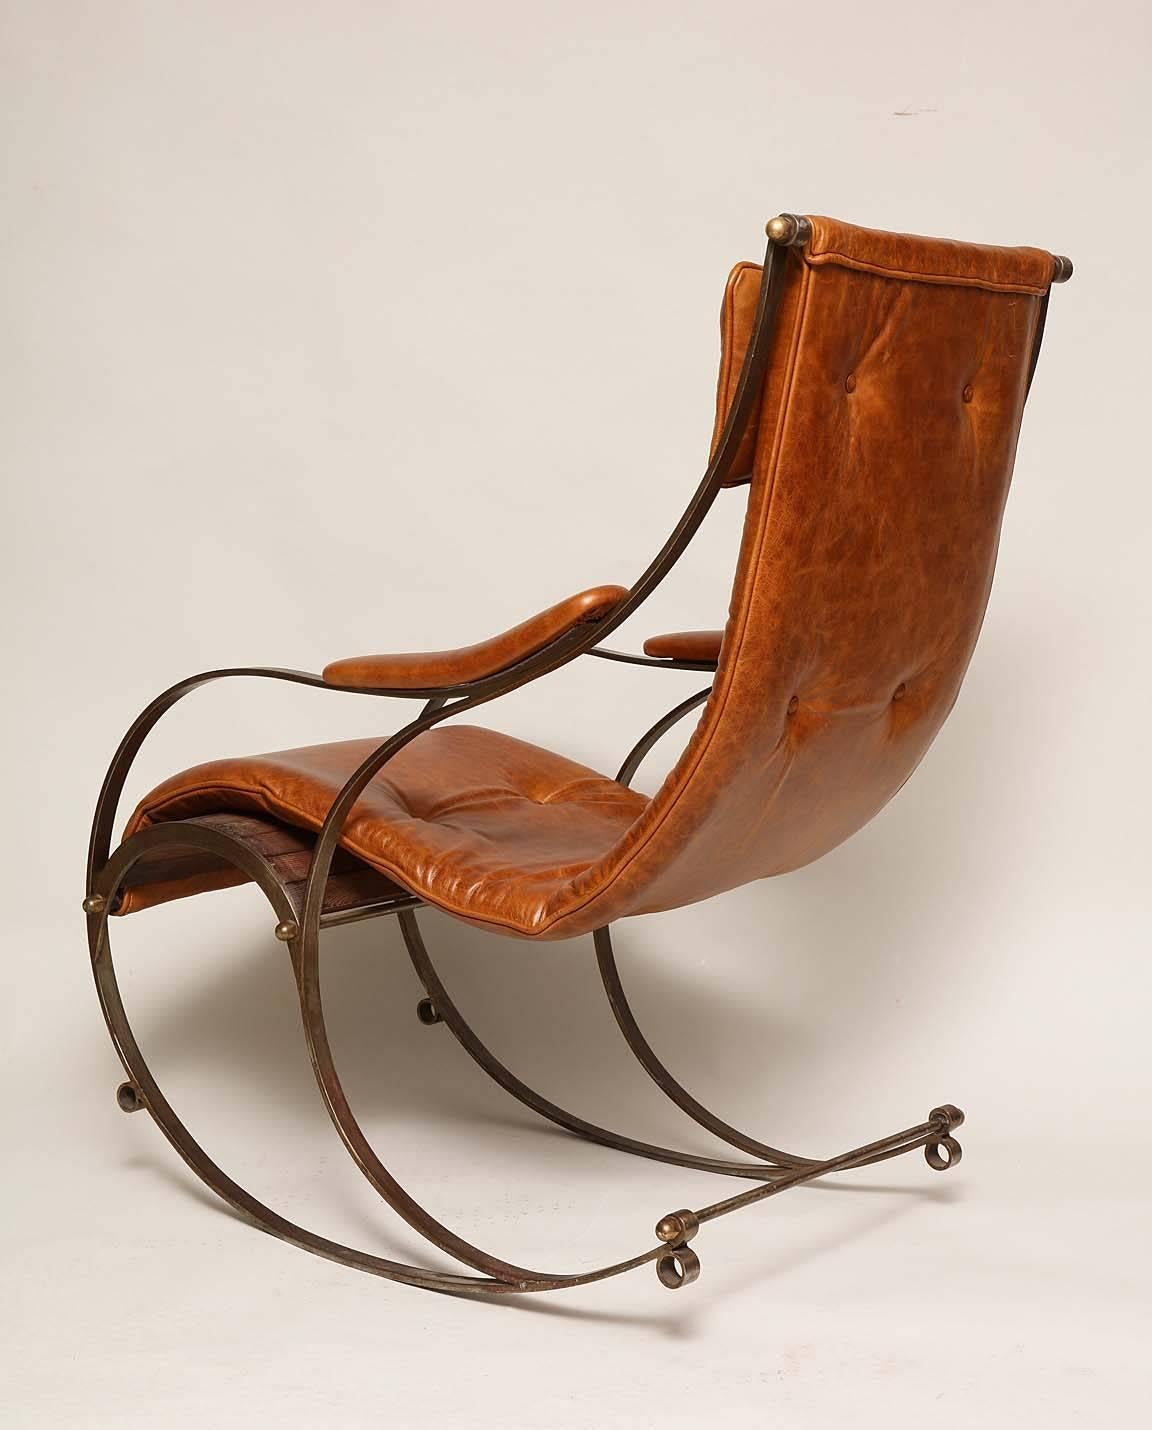 English 19th Century Steel and Leather Rocking Chair by R. W. Winfield